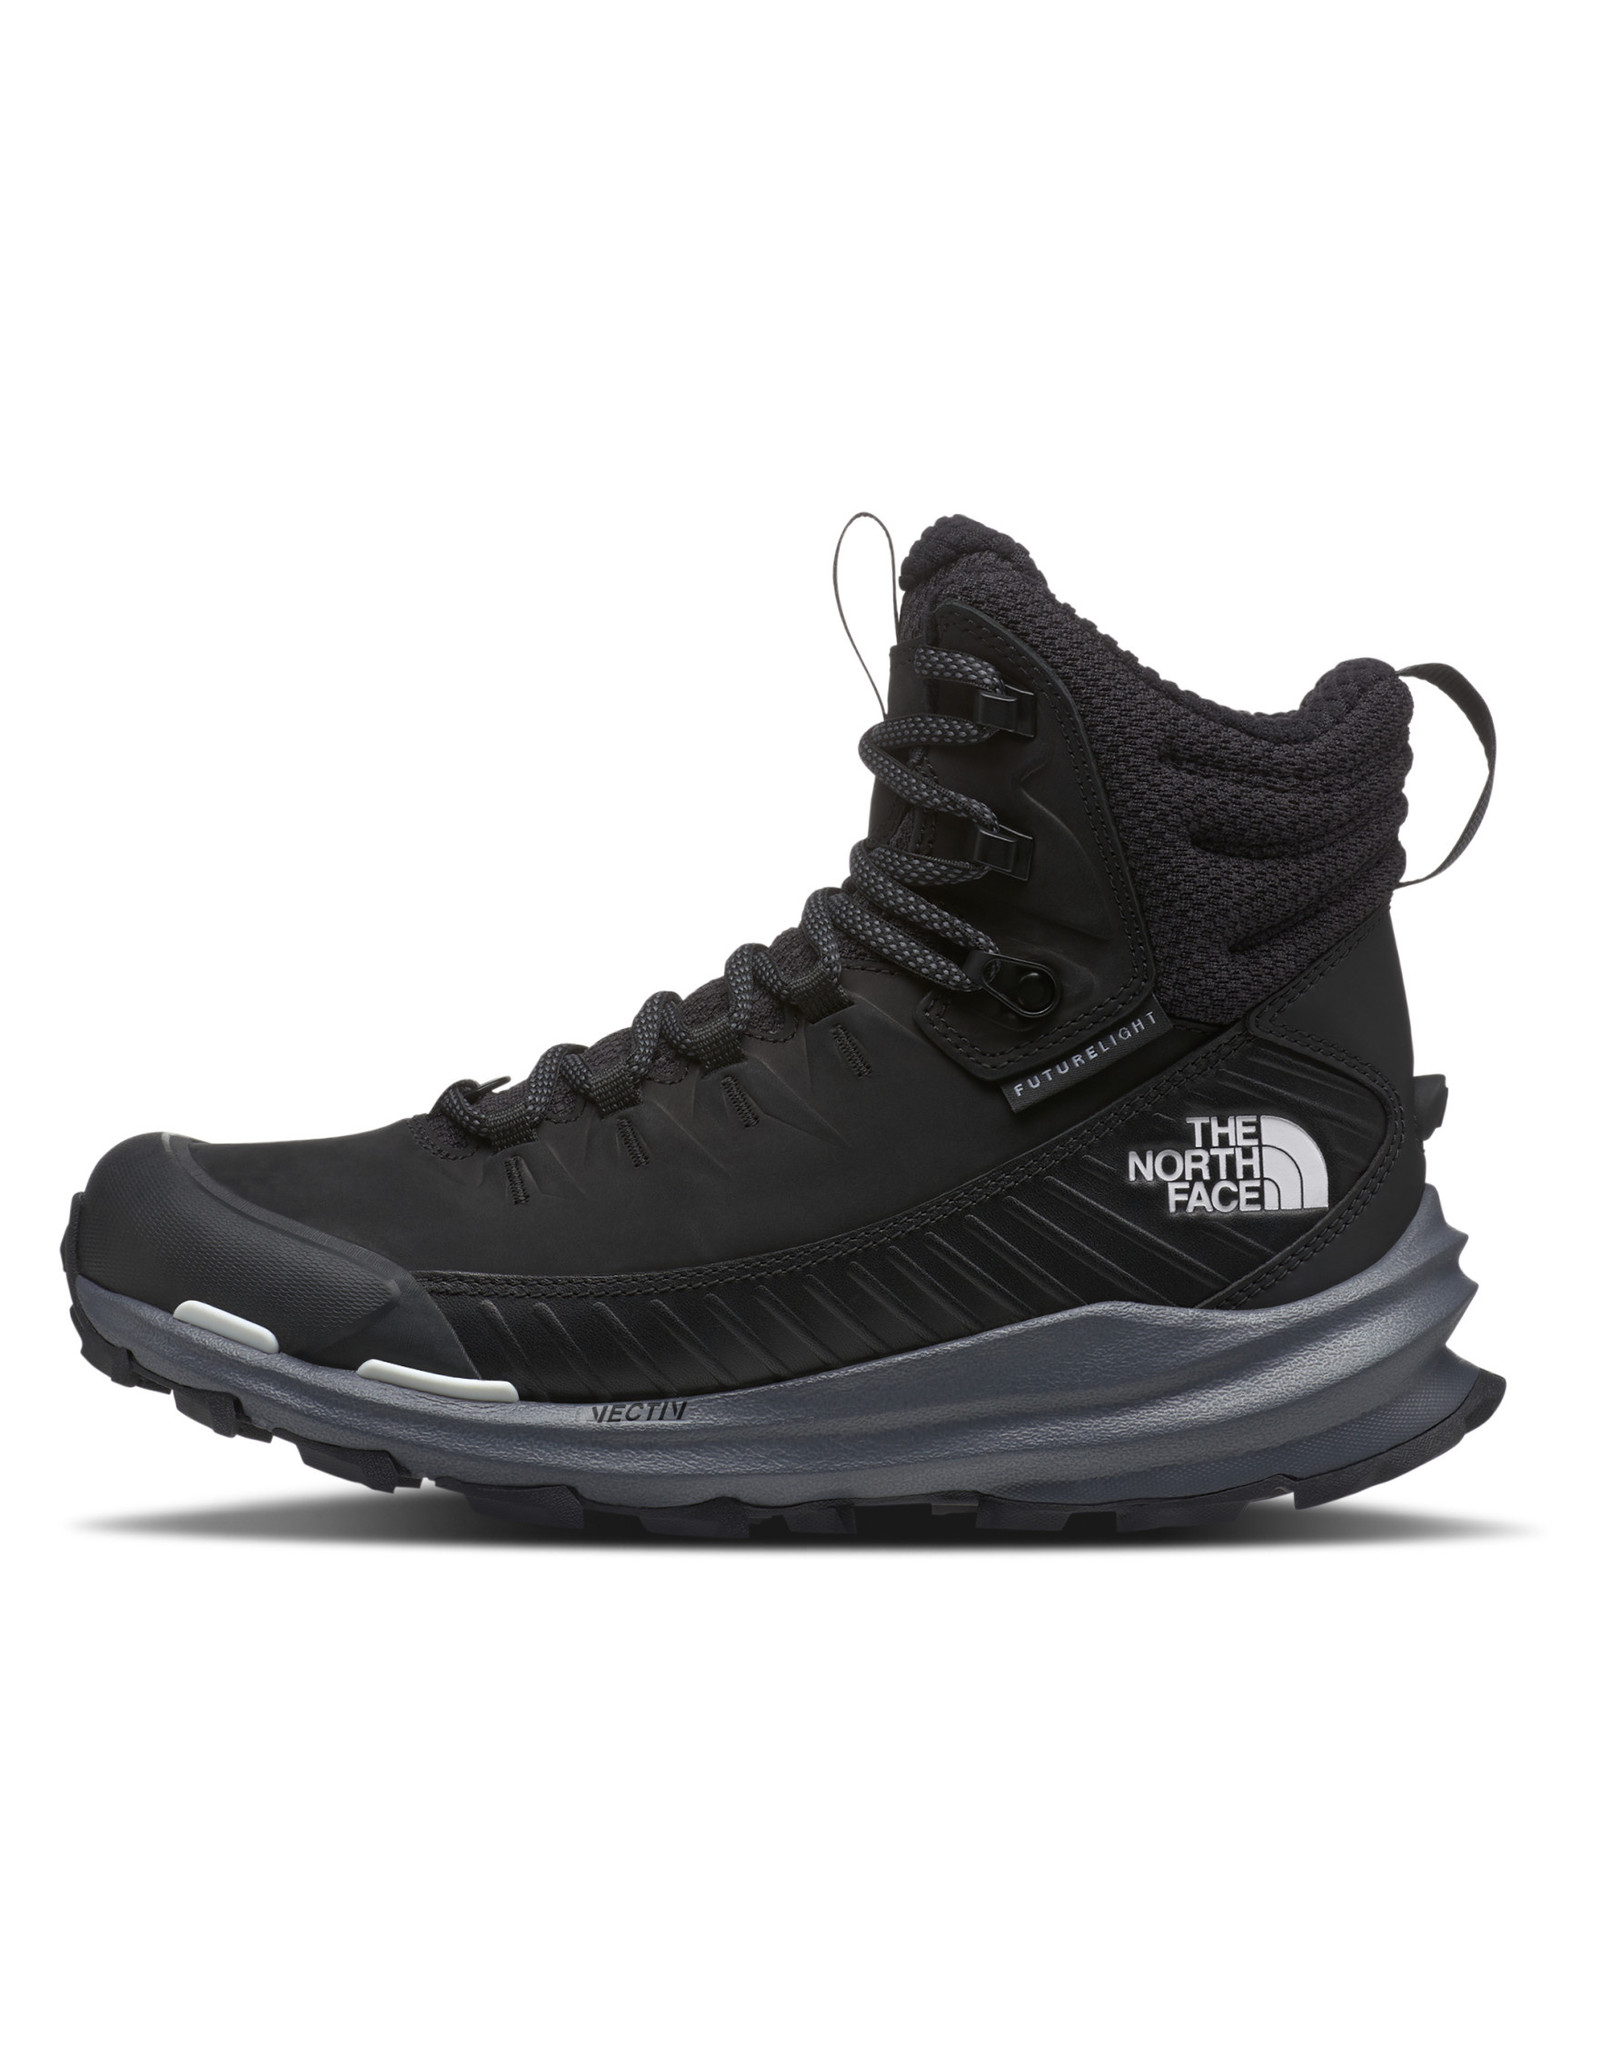 THE NORTH FACE WOMEN VECTIV FASTPACK INSULATED FUTURELIGHT BOOT